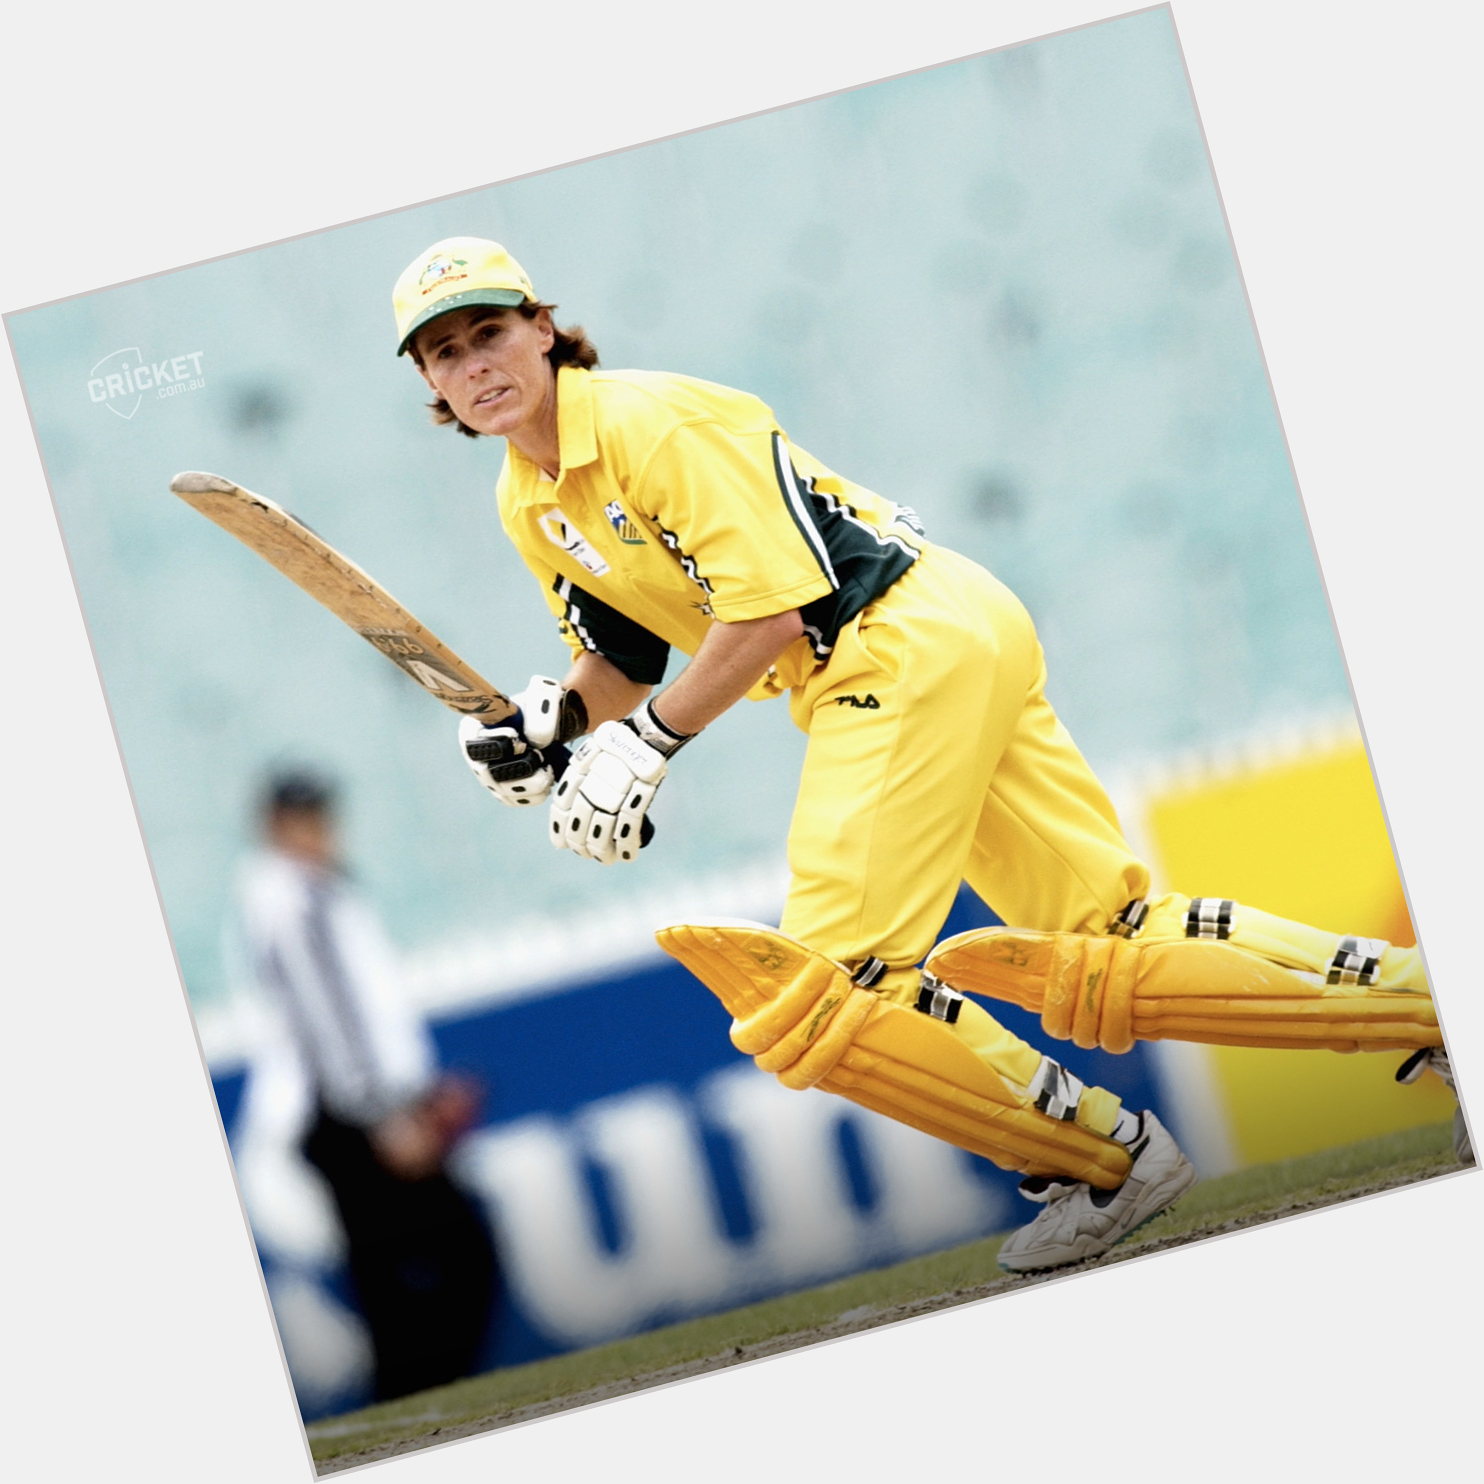 A big happy birthday to the great Belinda Clark - a legend of the sport both on and off the field! 